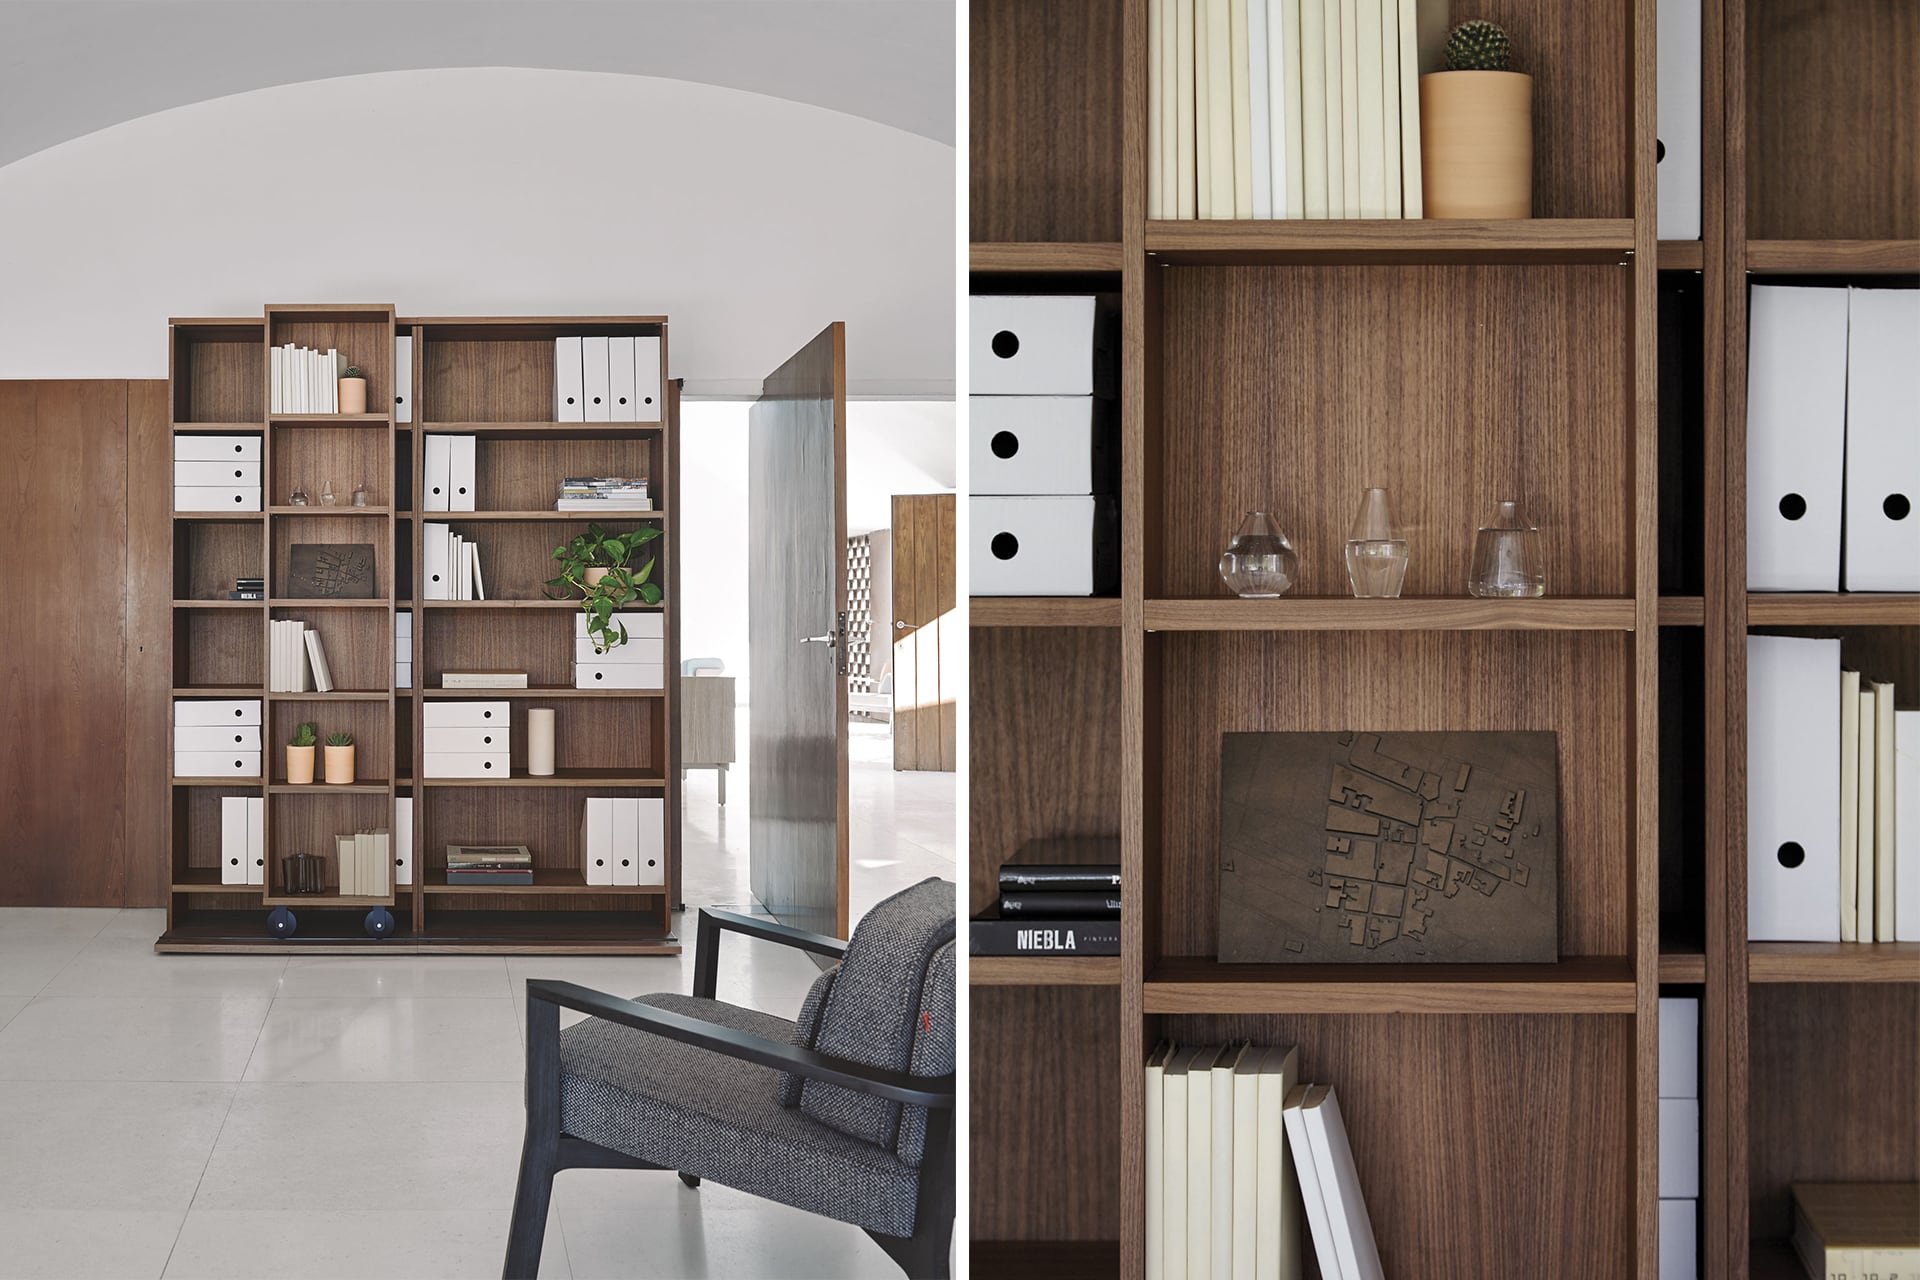 Literatura Classic Bookcase from Punt Mobles, designed by Vicent Martinez